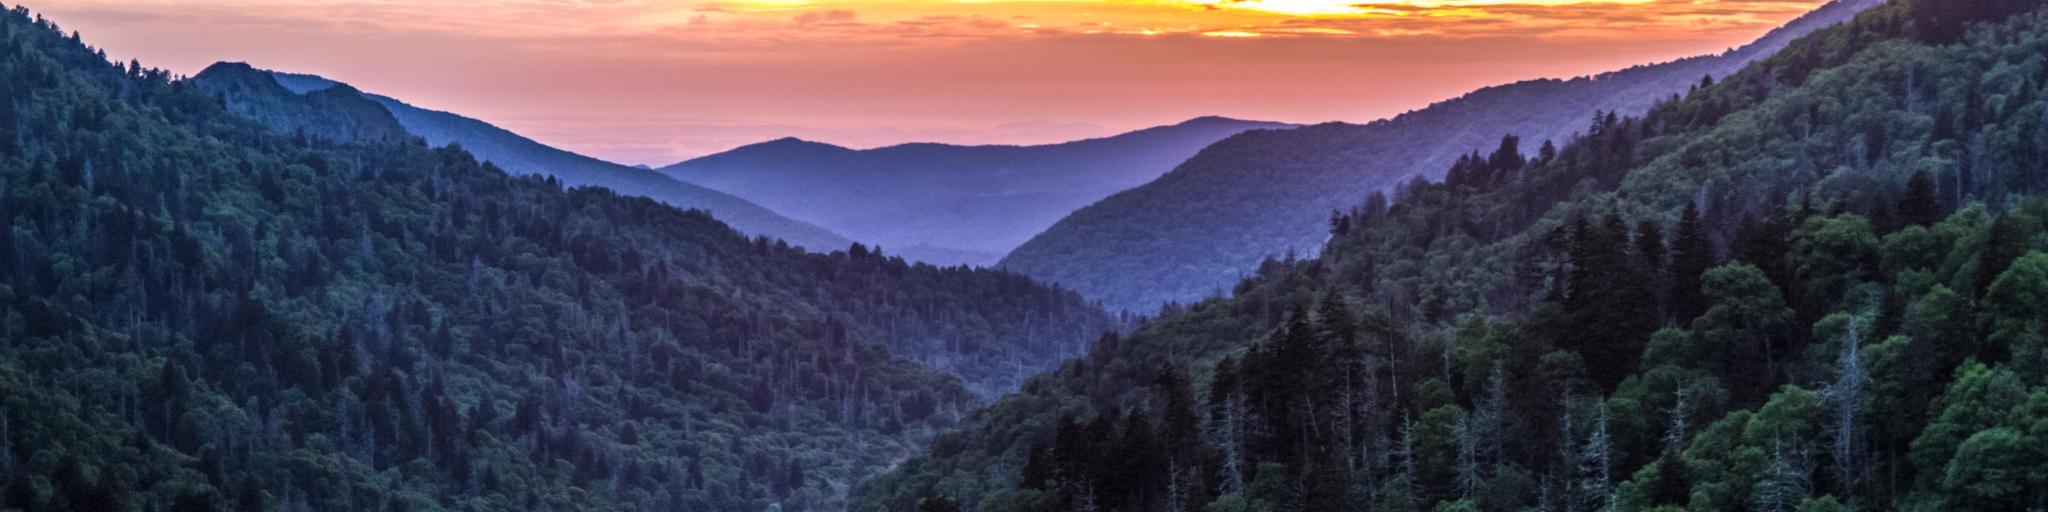 Great Smoky Mountains, Tennessee, USA at sunset with a panorama over the many layers and ridges of the beautiful Appalachian Mountains.